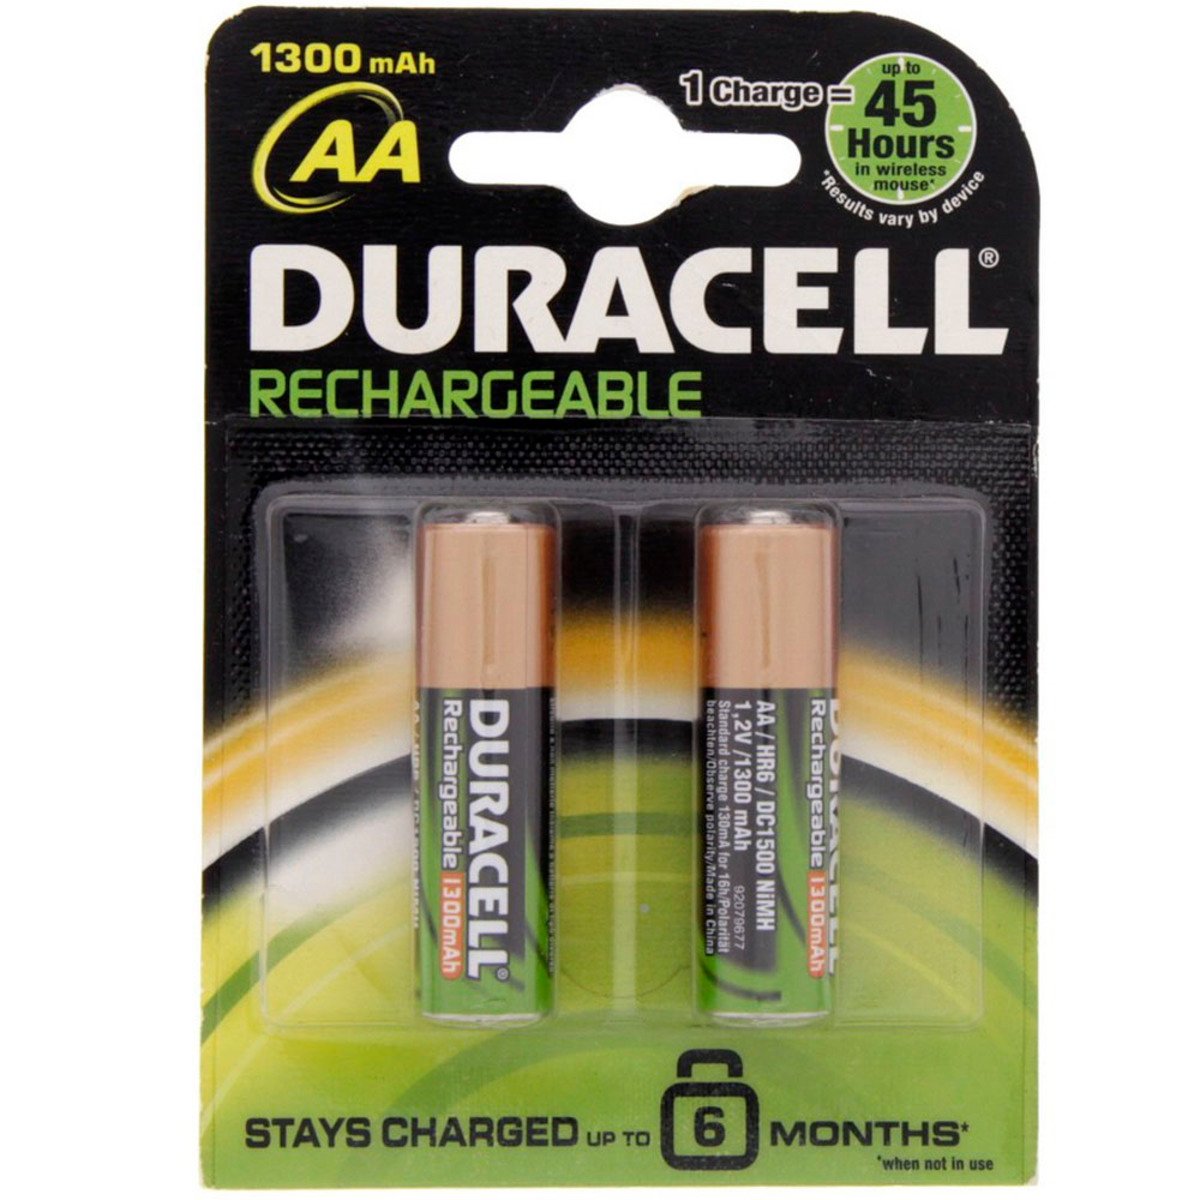 Duracell Rechargeable AA Battery